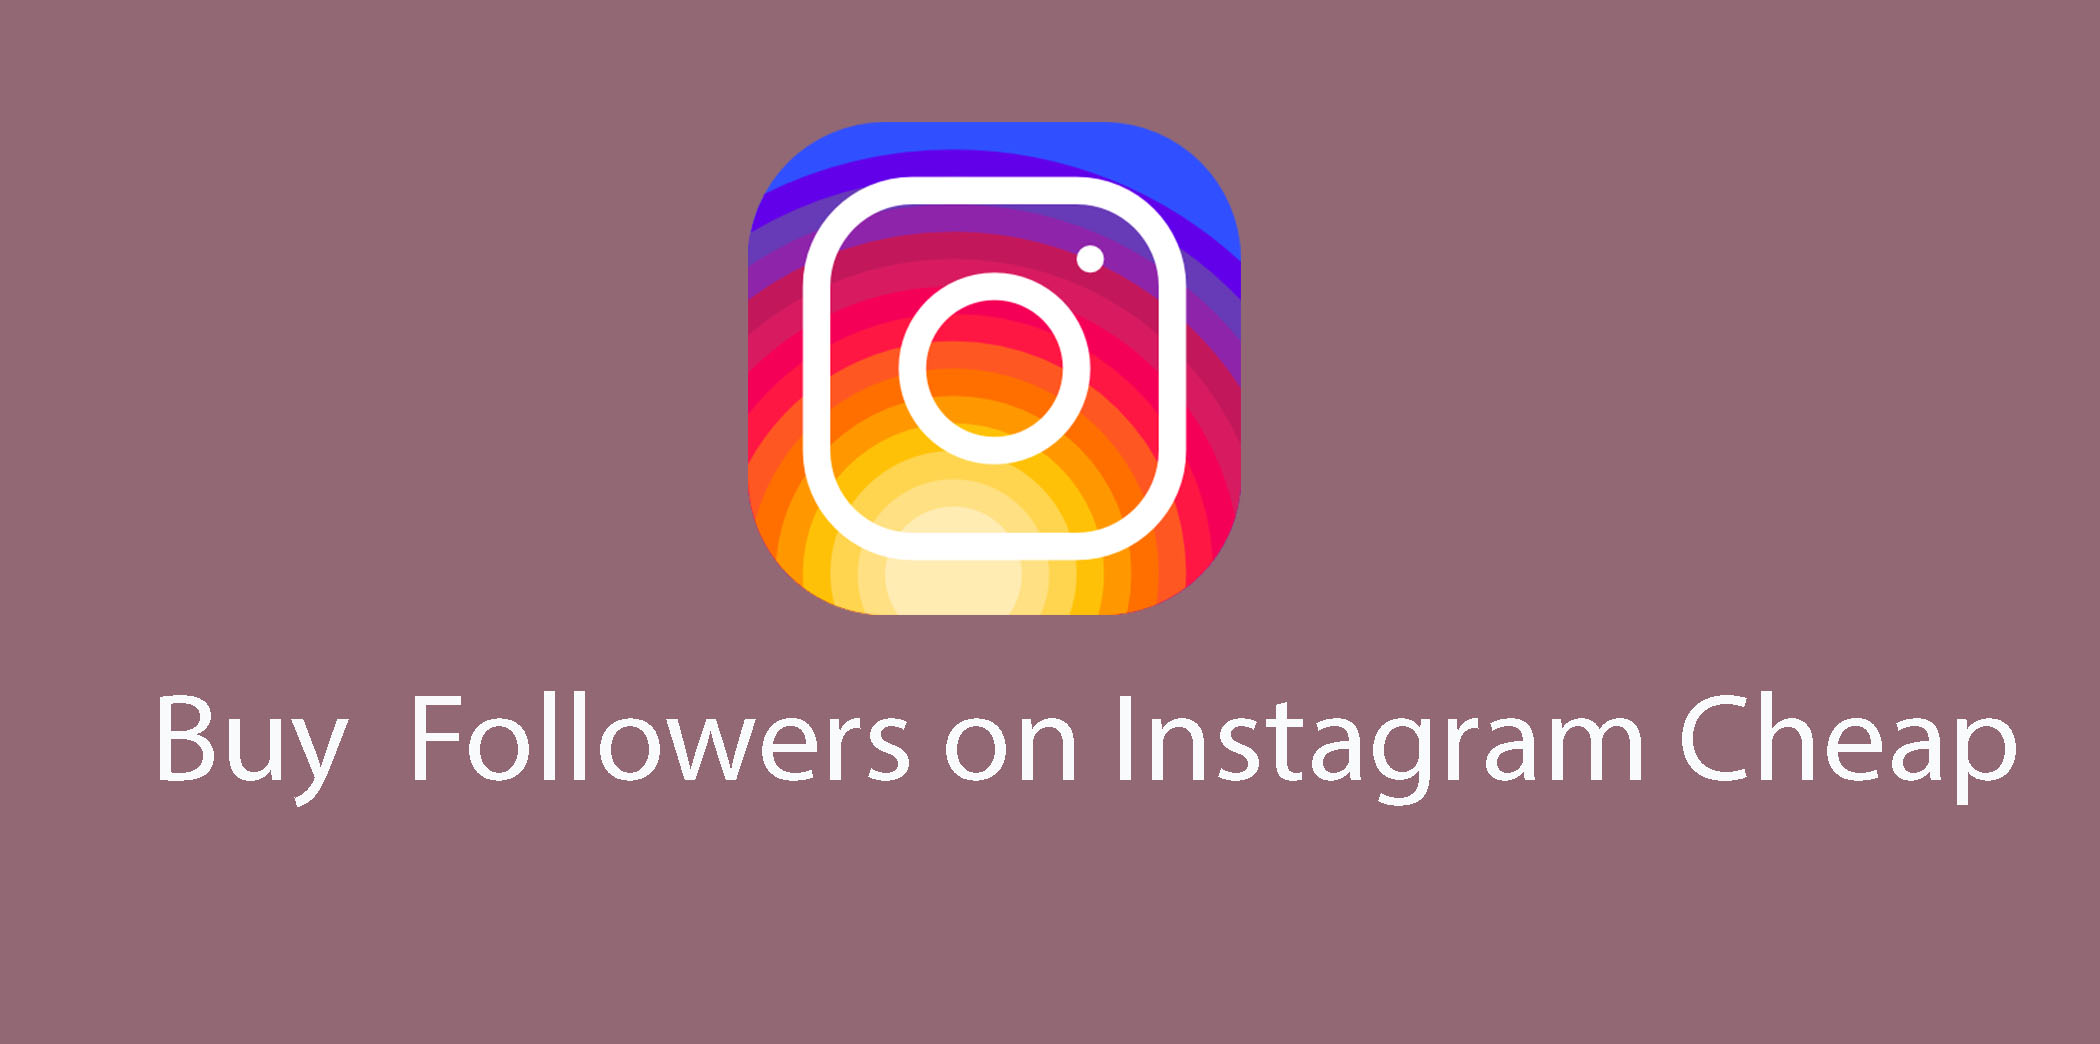 Pros of Instagram business account